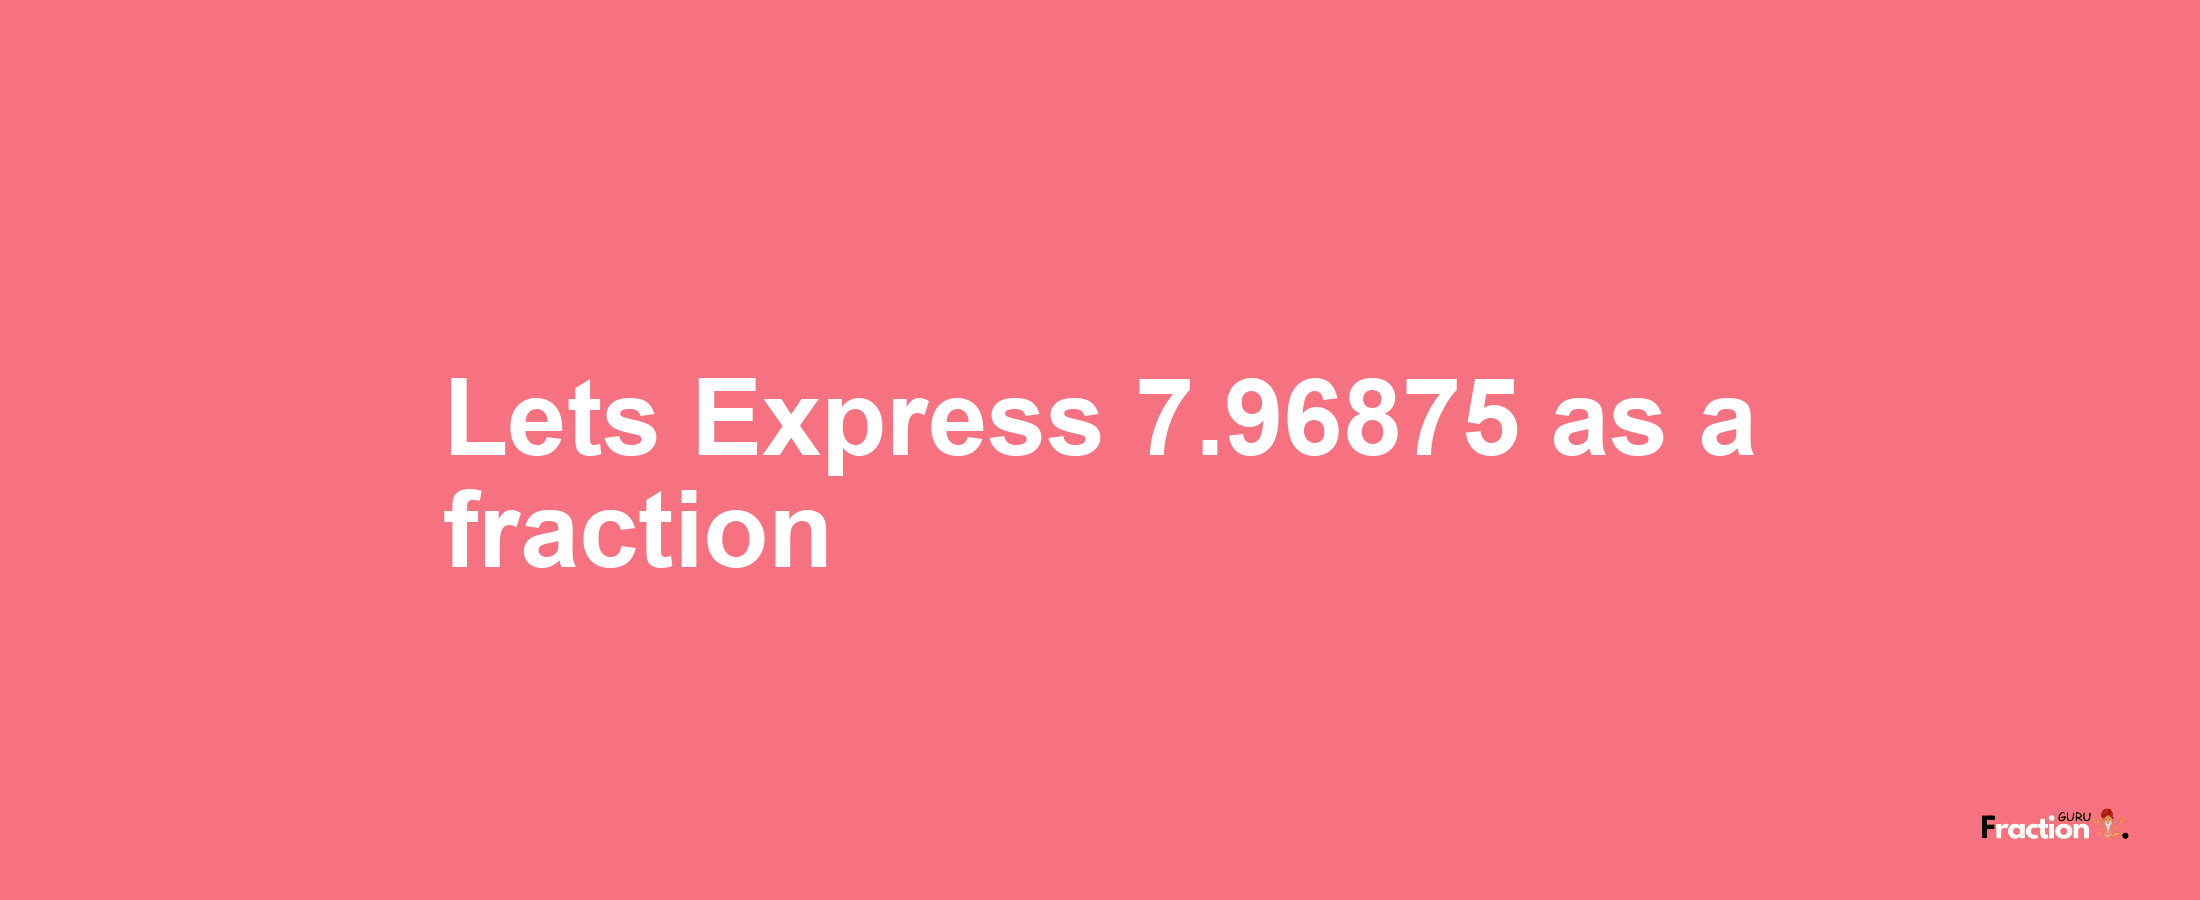 Lets Express 7.96875 as afraction